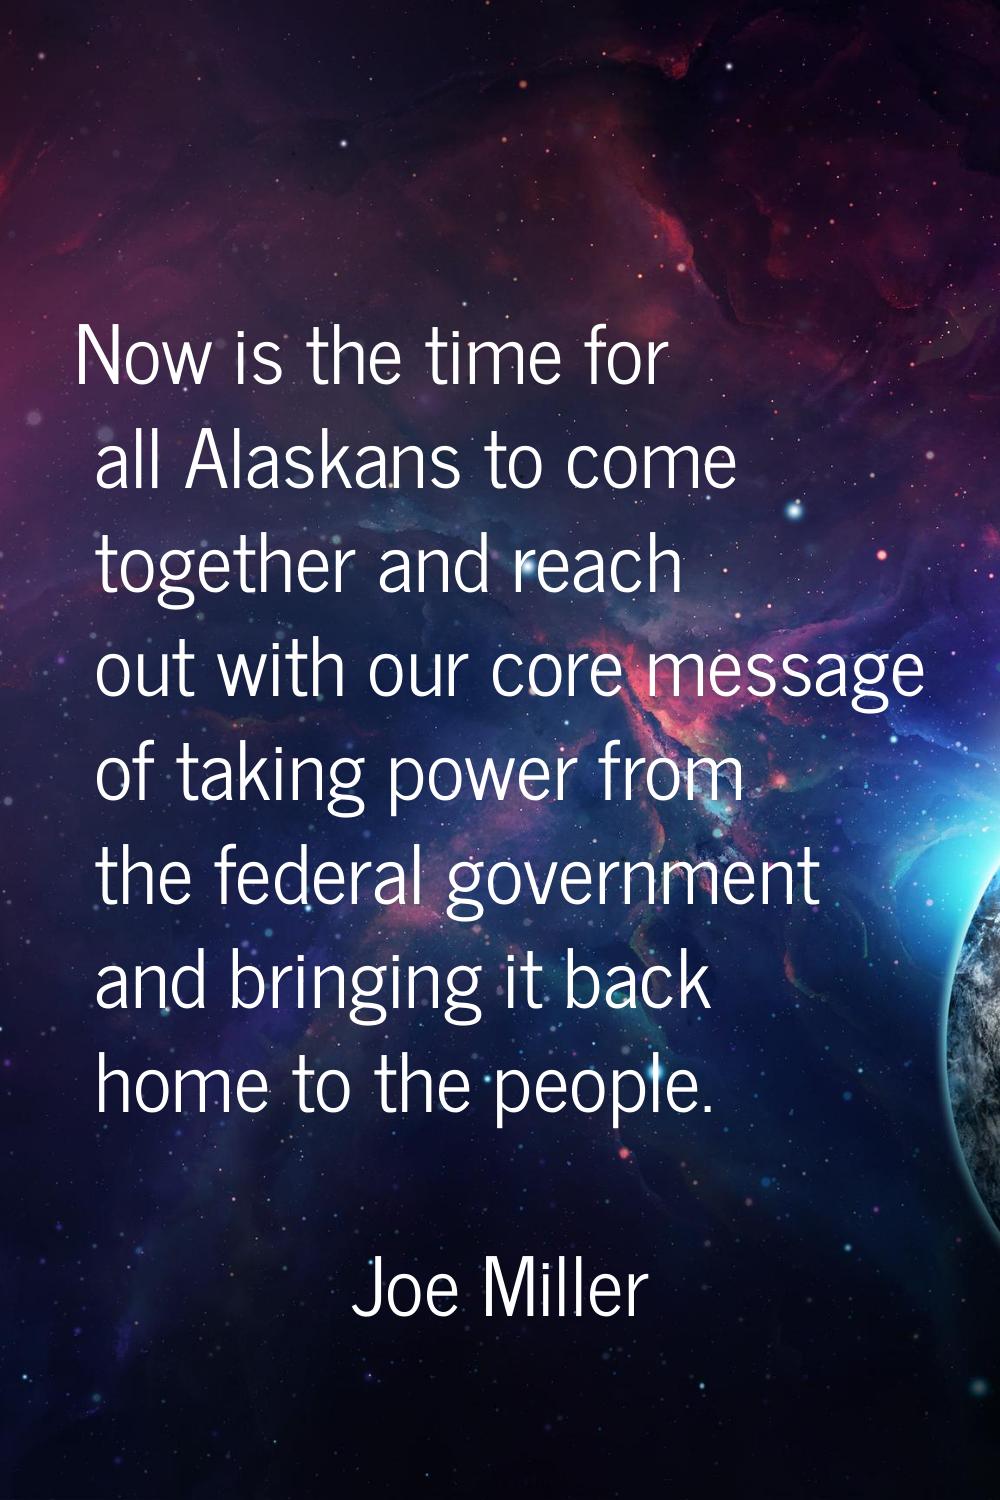 Now is the time for all Alaskans to come together and reach out with our core message of taking pow